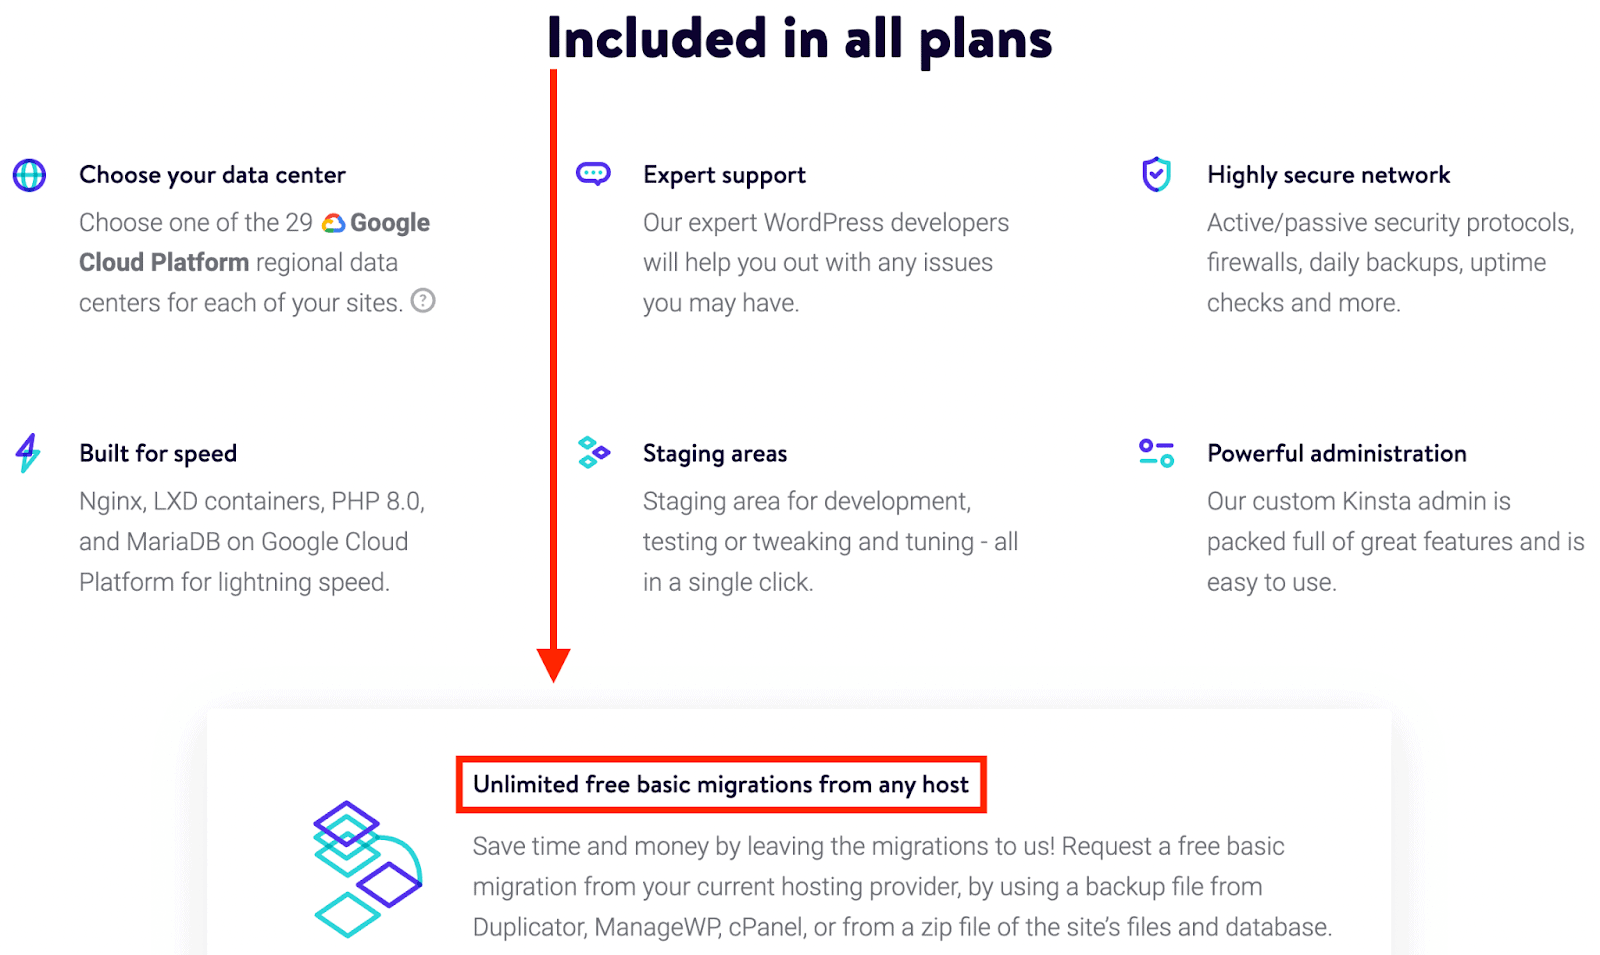 kinsta, included in all plans